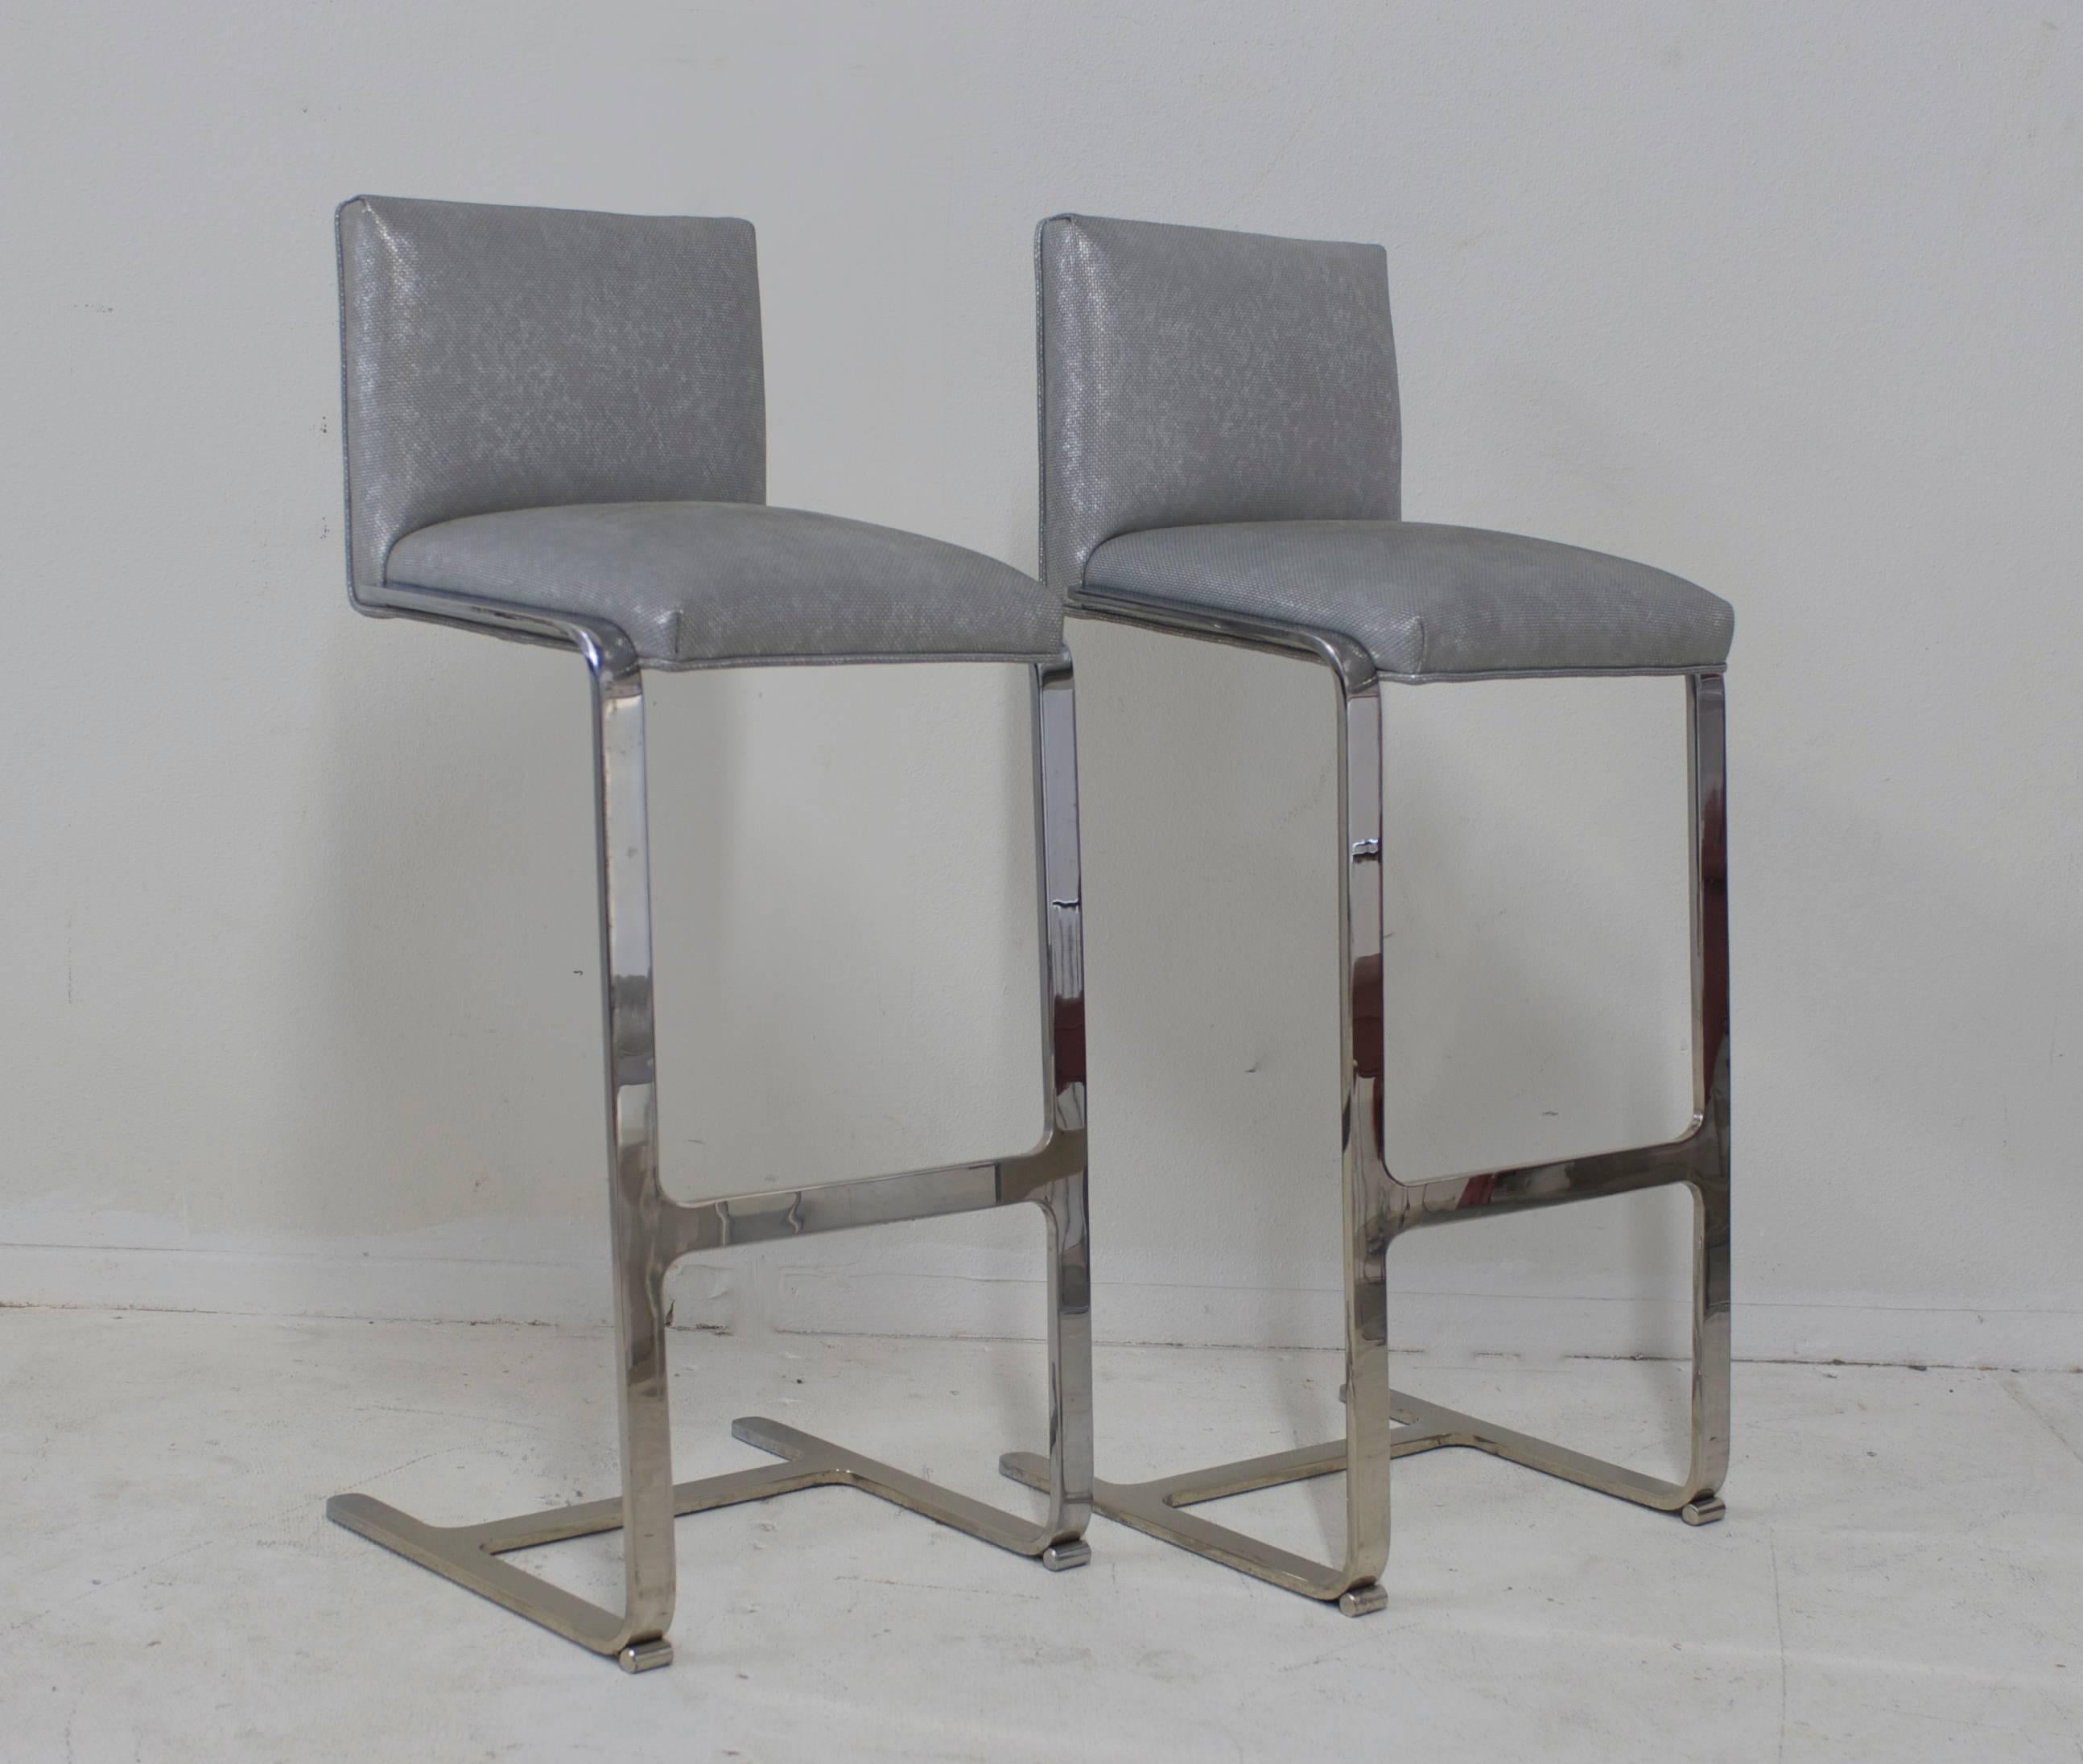 Set of two barstools with backs that have been freshly upholstered in a soft silver leather with an iridescent sheen to it. The bar stools are cantilevered and nice and heavy.